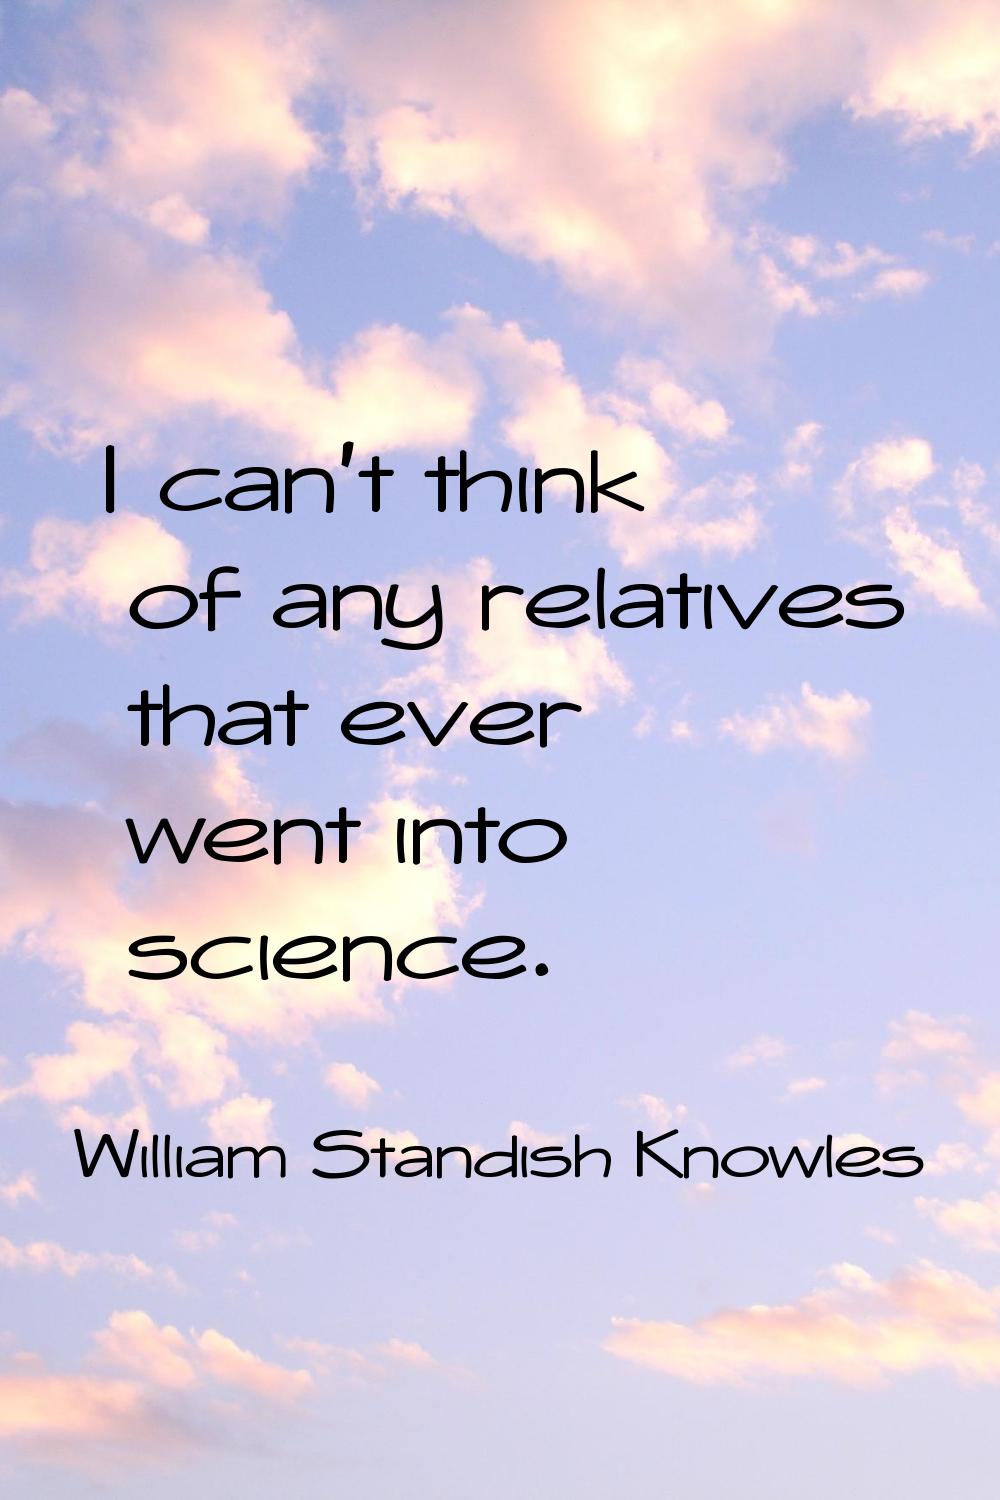 I can't think of any relatives that ever went into science.